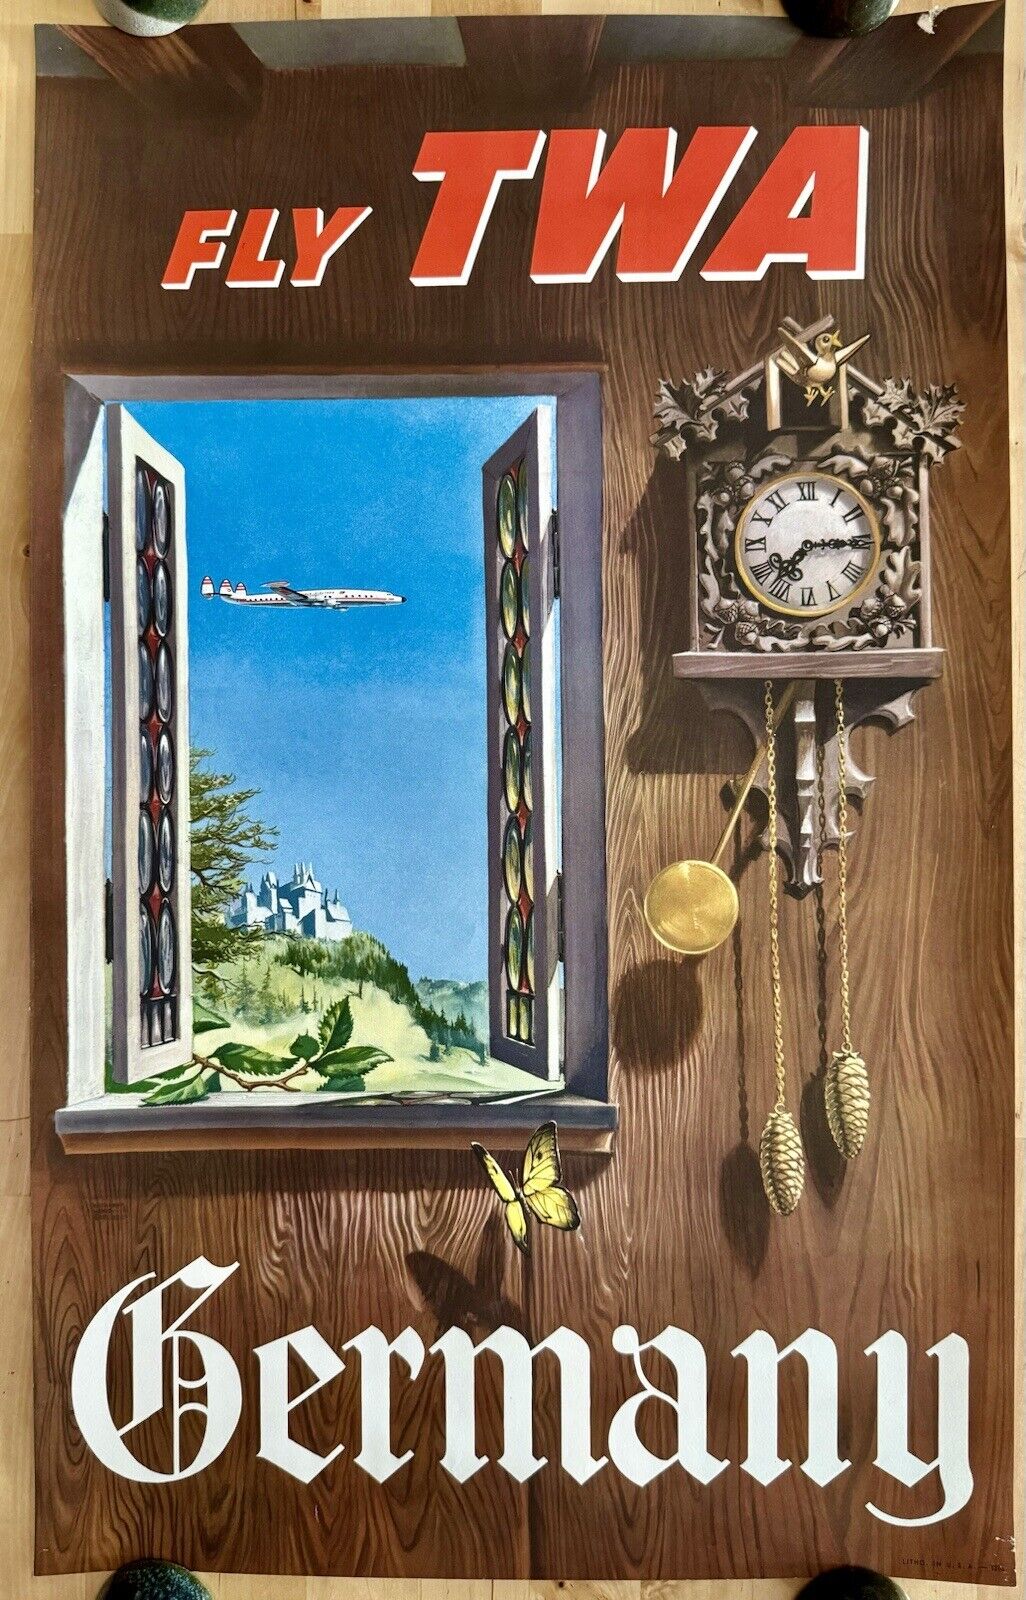 FLY TWA GERMANY Original Vtg Travel Poster Trans World Airlines 1950’s 16x25